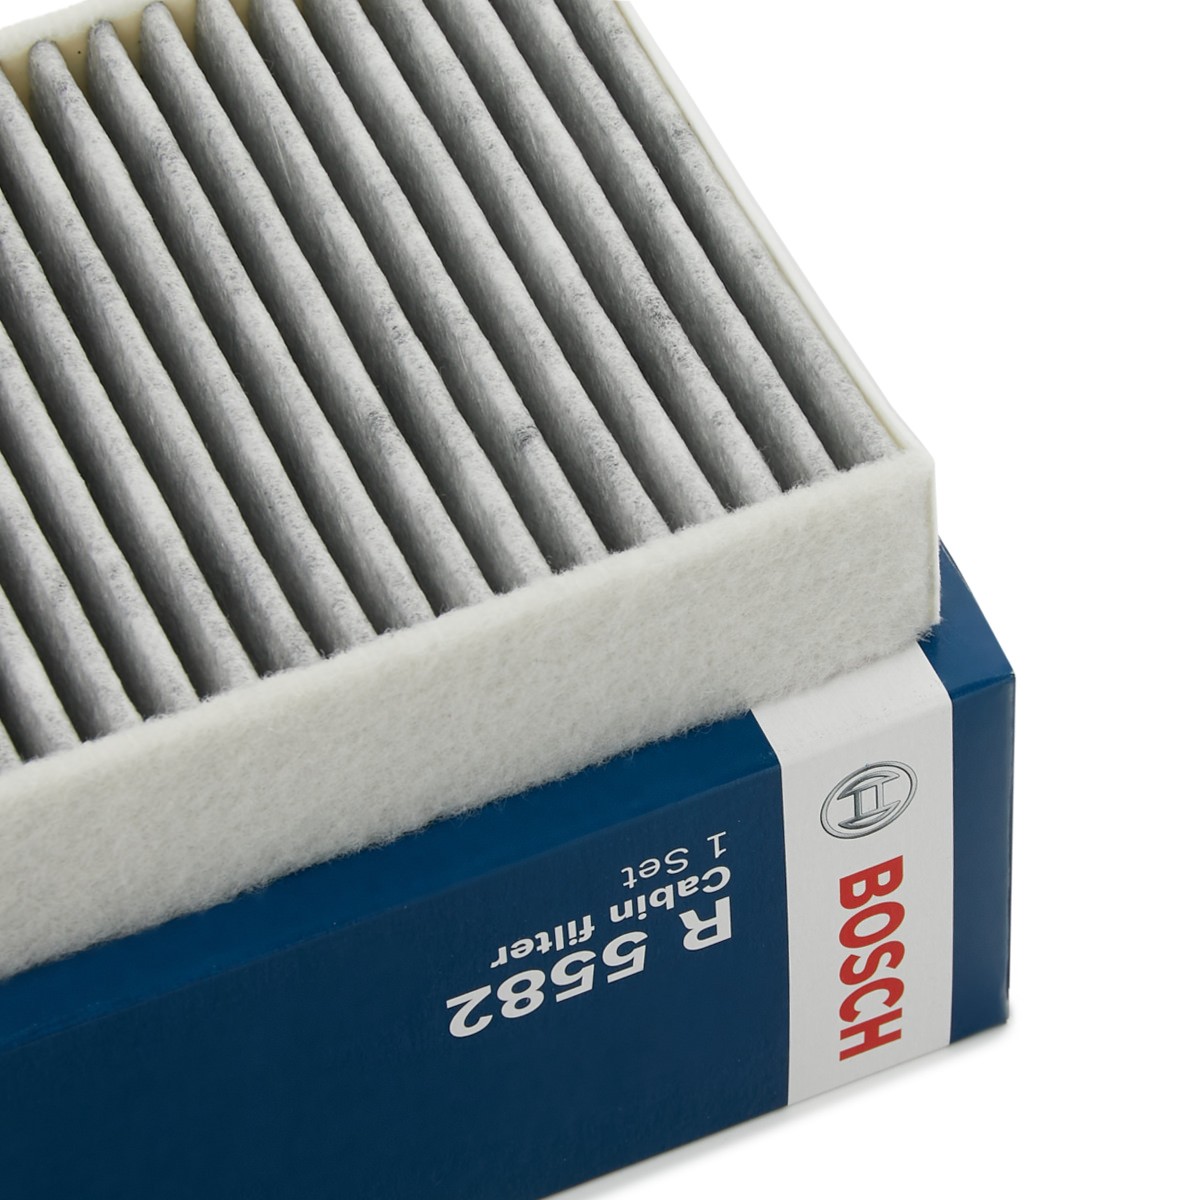 BOSCH 1987435582 Air conditioner filter Activated Carbon Filter, 233 mm x 114,5 mm x 32 mm